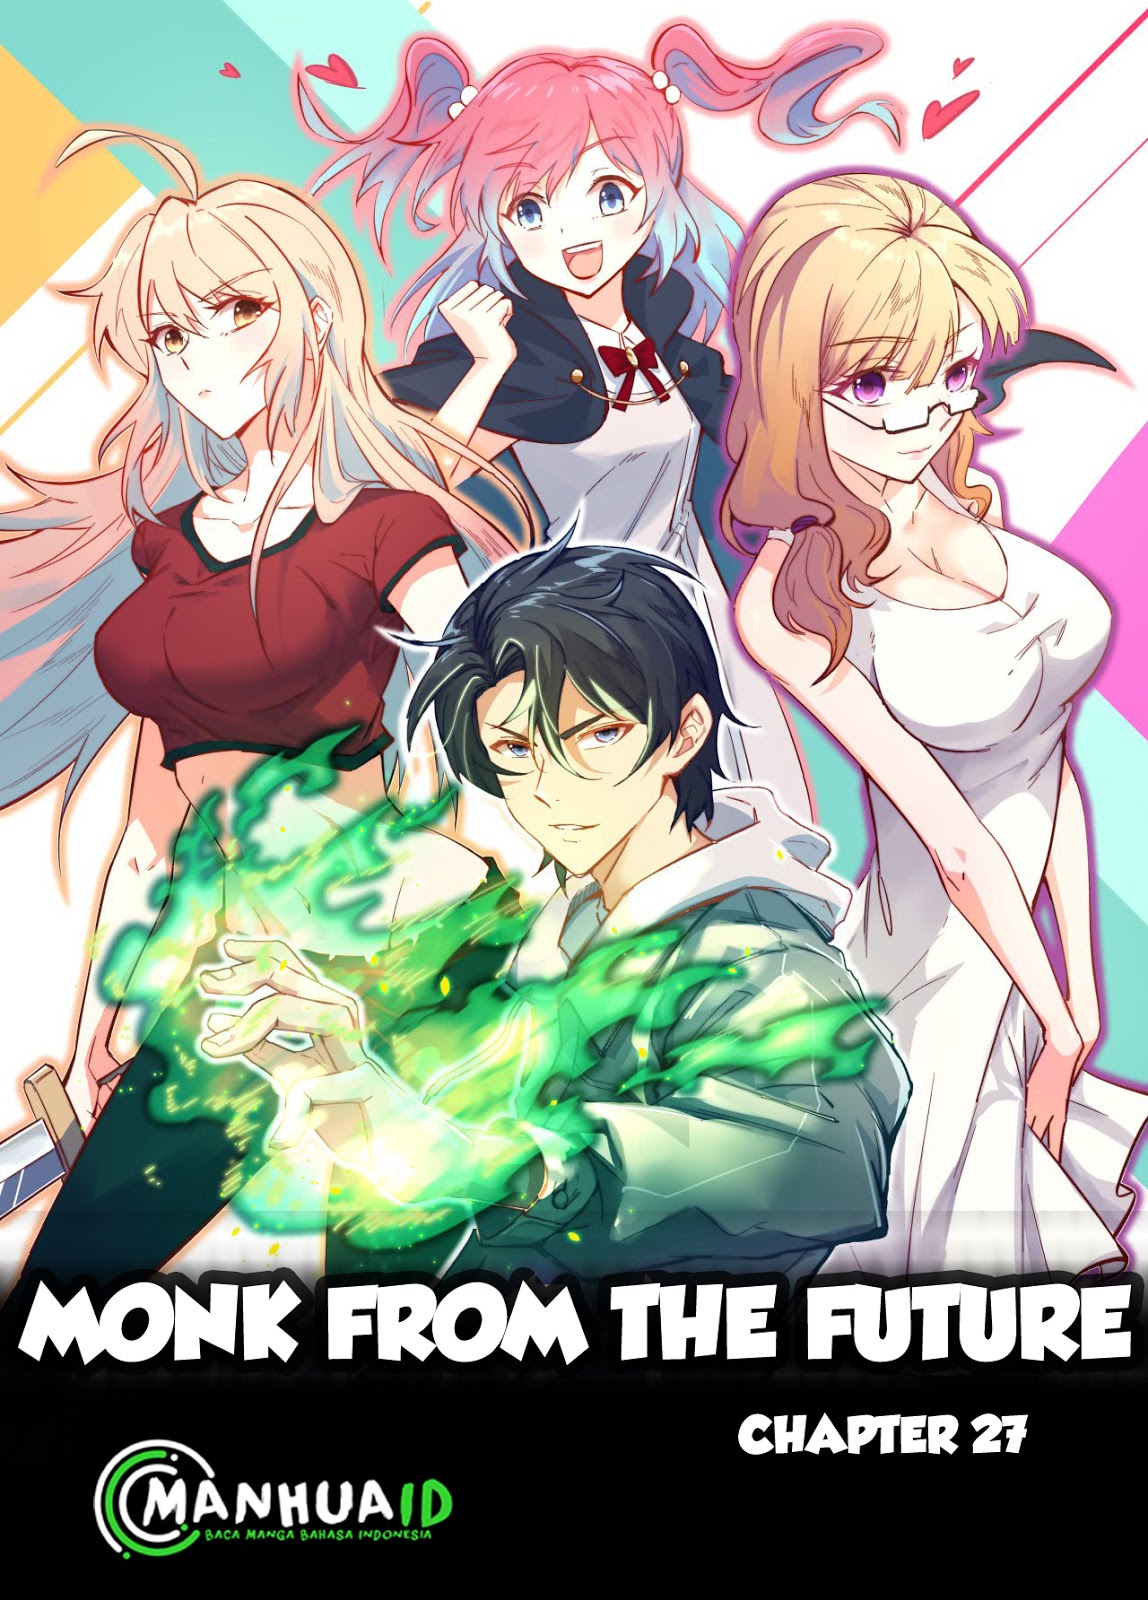 Monk From the Future Chapter 27